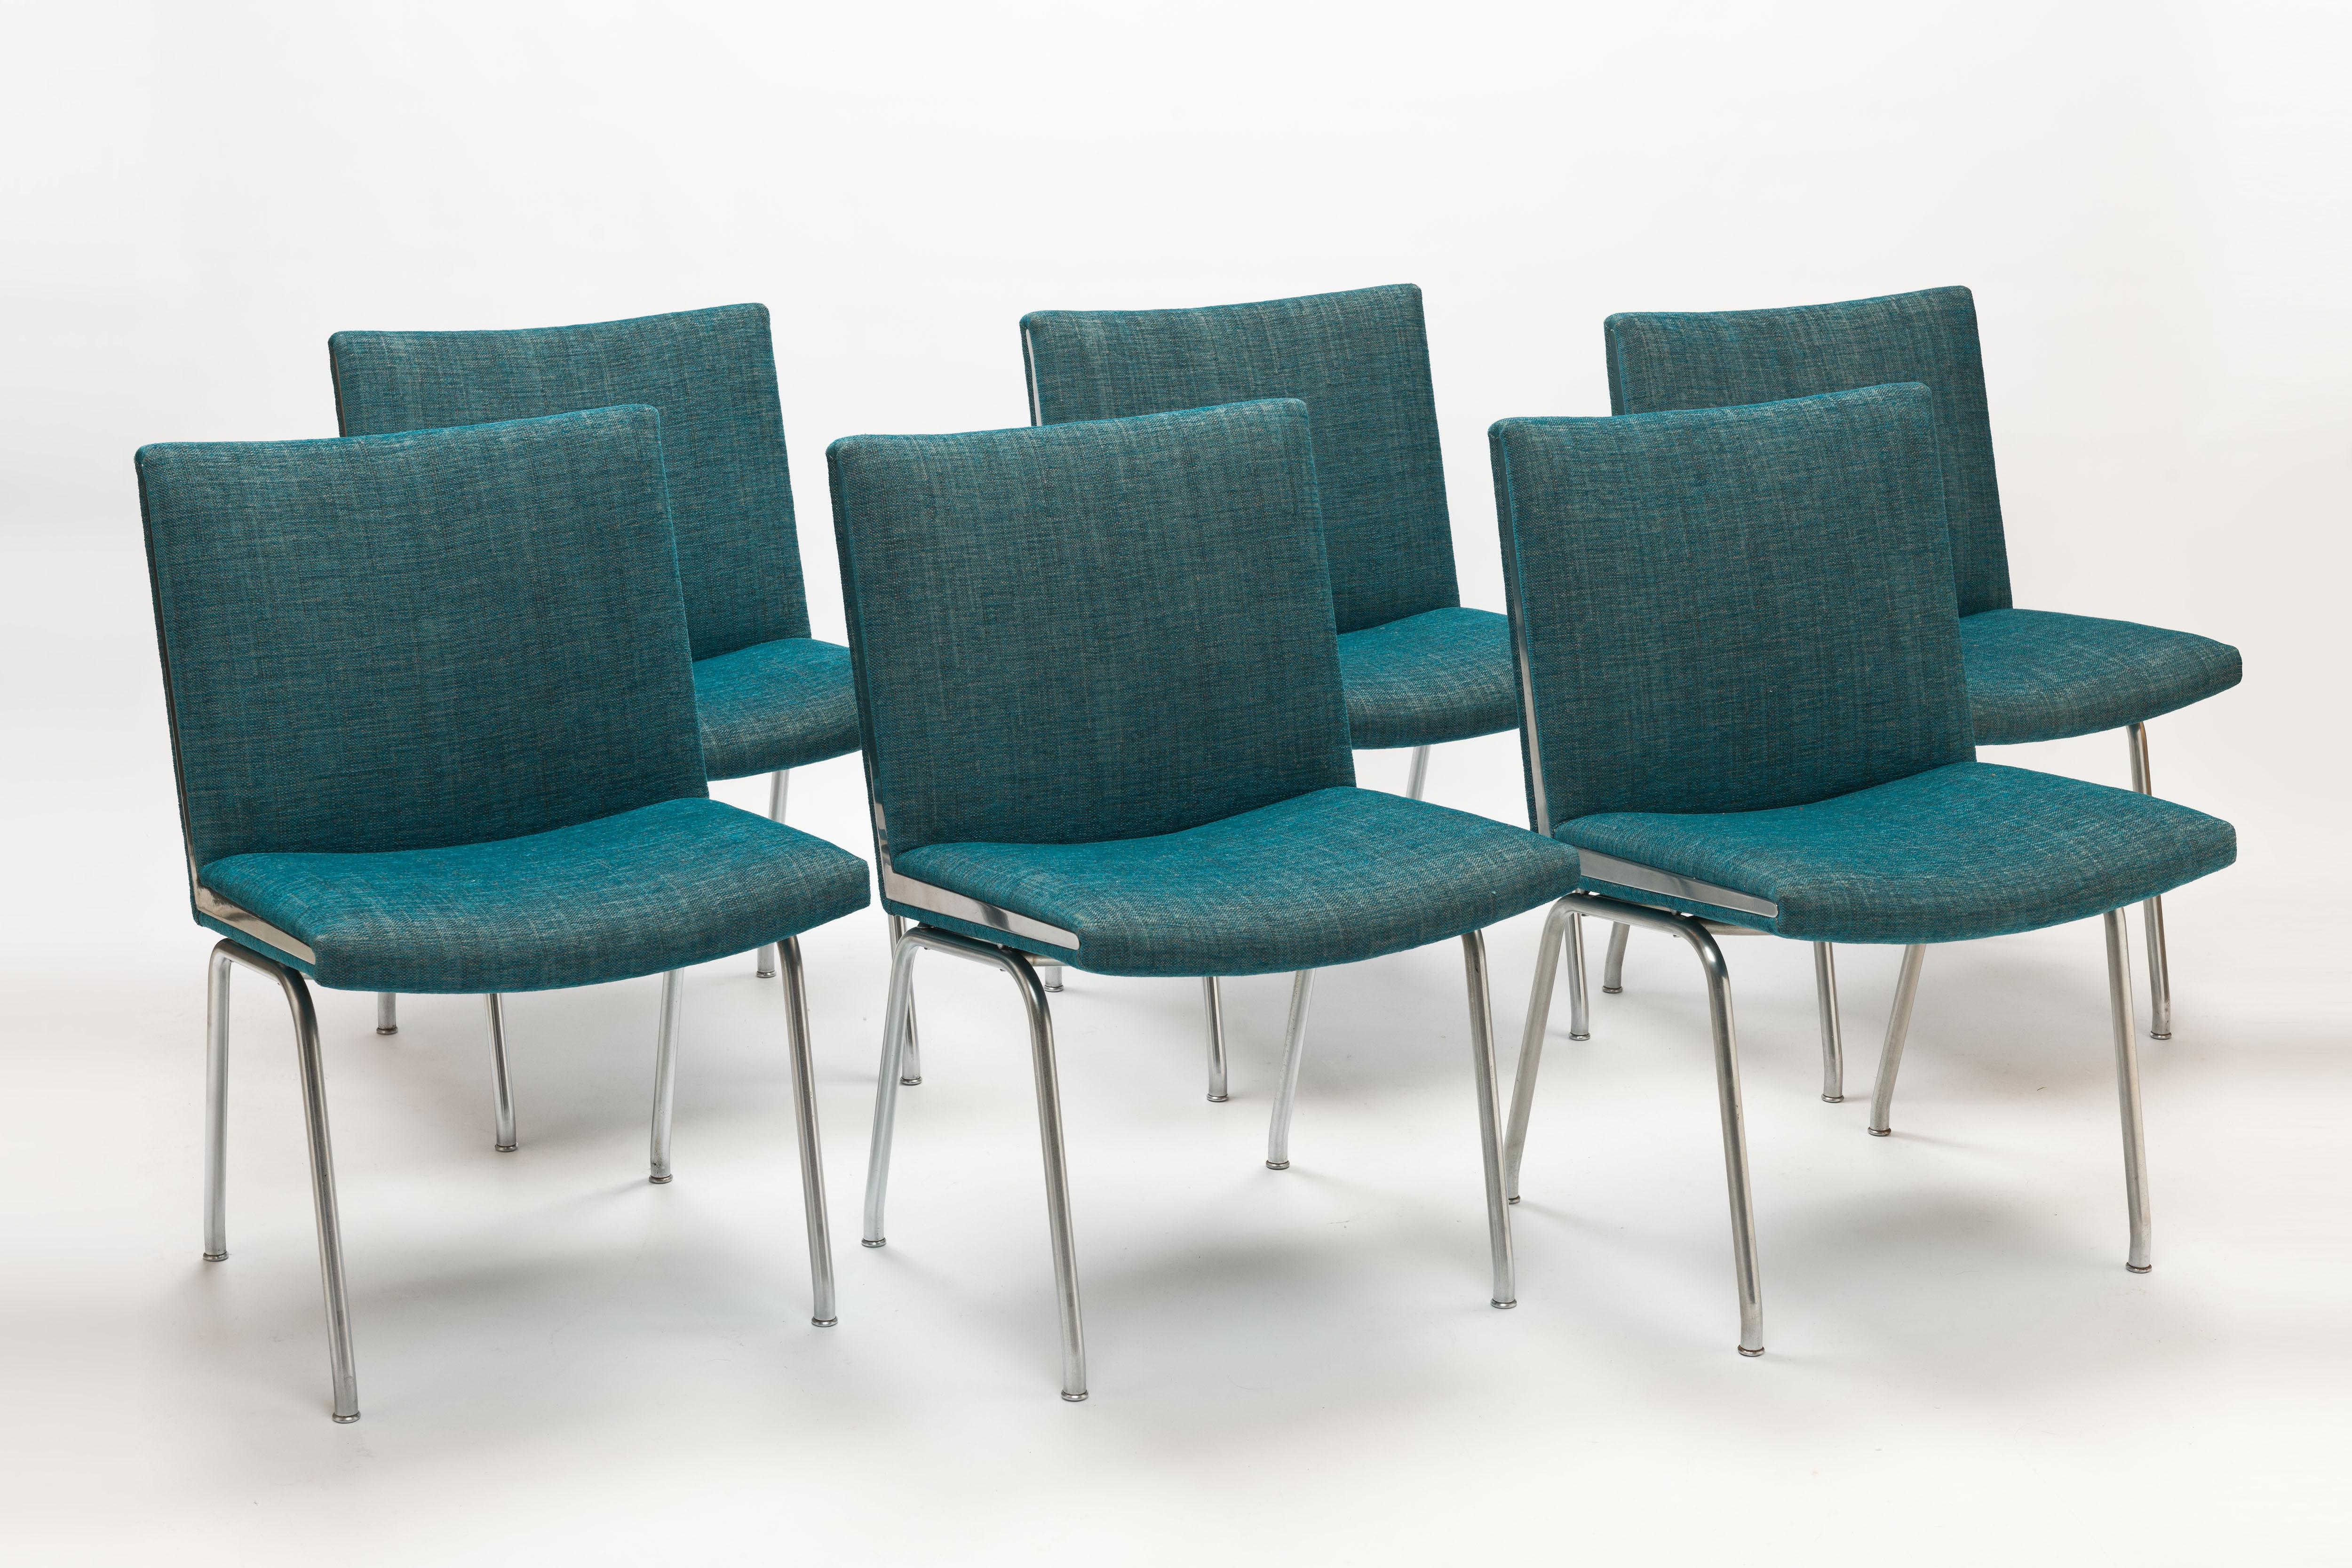 Set of 6 Hans Wegner AP38 'Airport' Chairs by A.P. Stolen, Denmark. Exceptional modern designed chairs on steel frames with sharp triangle shape chrome-plated steel details on both sides of each seat. Designed in 1959. Seats and interiors are fully